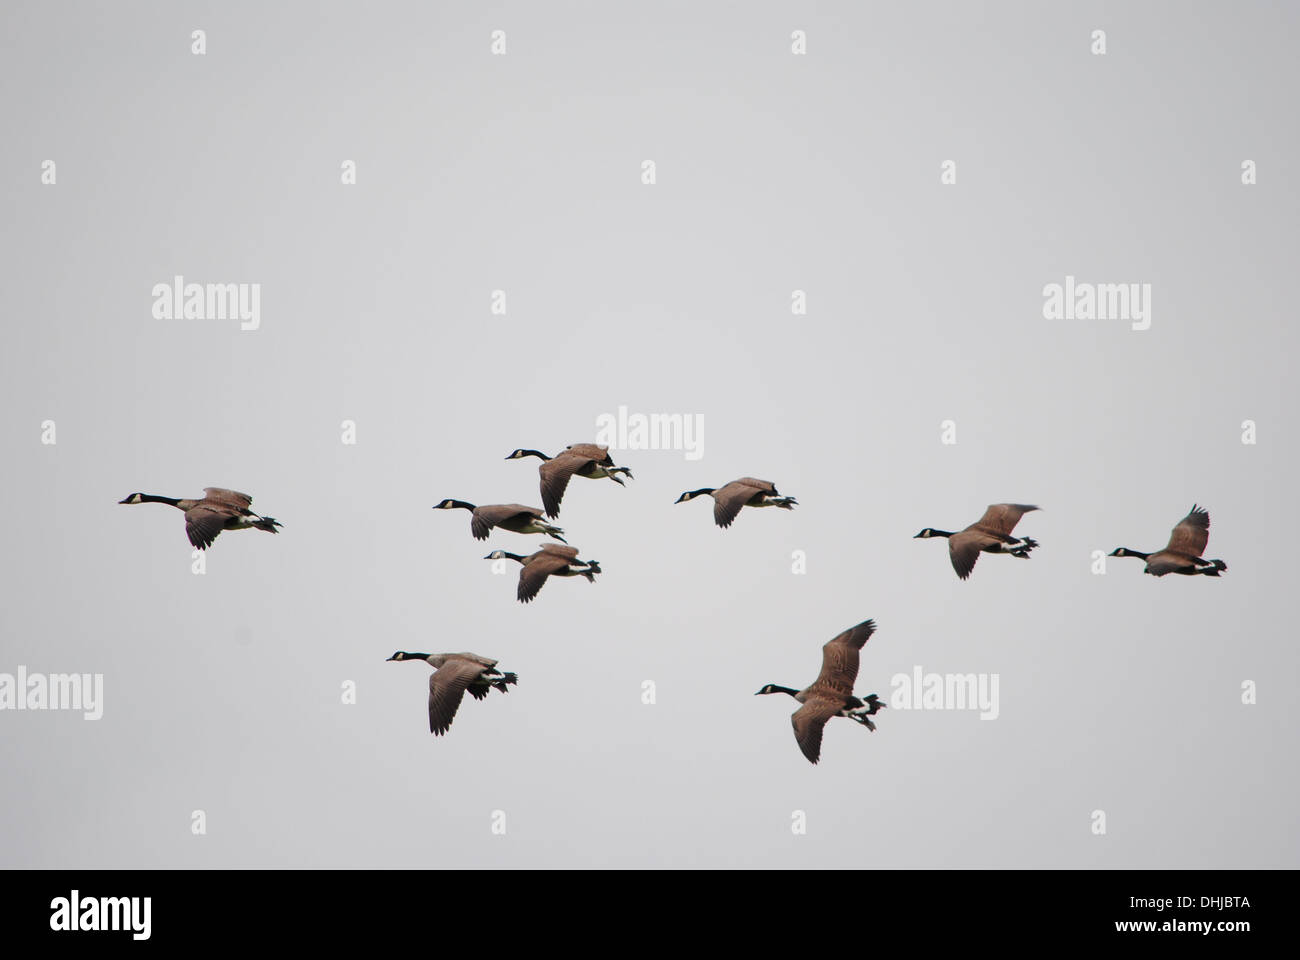 Canada Geese,flies across the sky,training for winter migration. Stock Photo